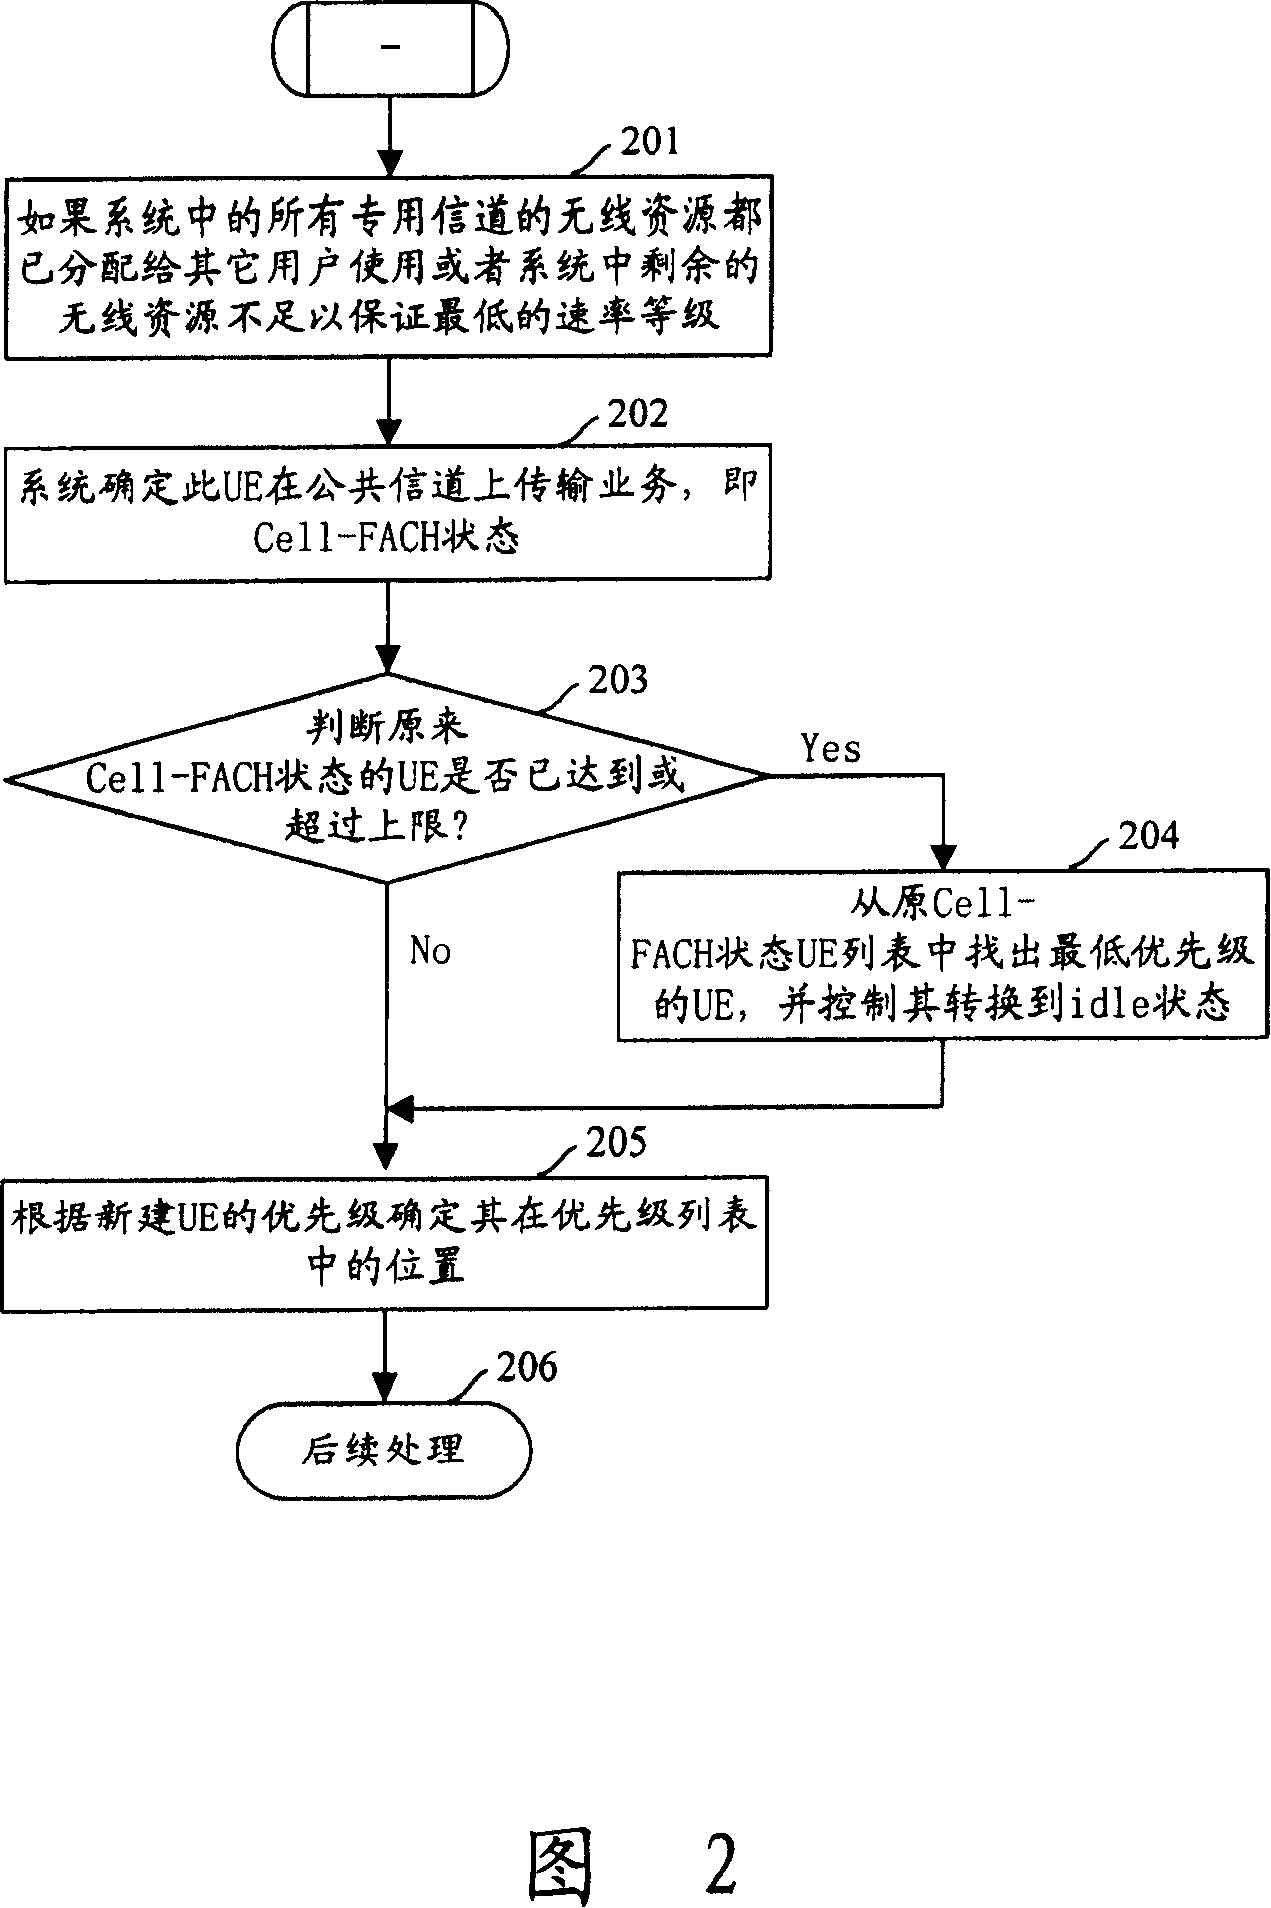 Method for controlling non-realtime service data transmission of mobile terminal